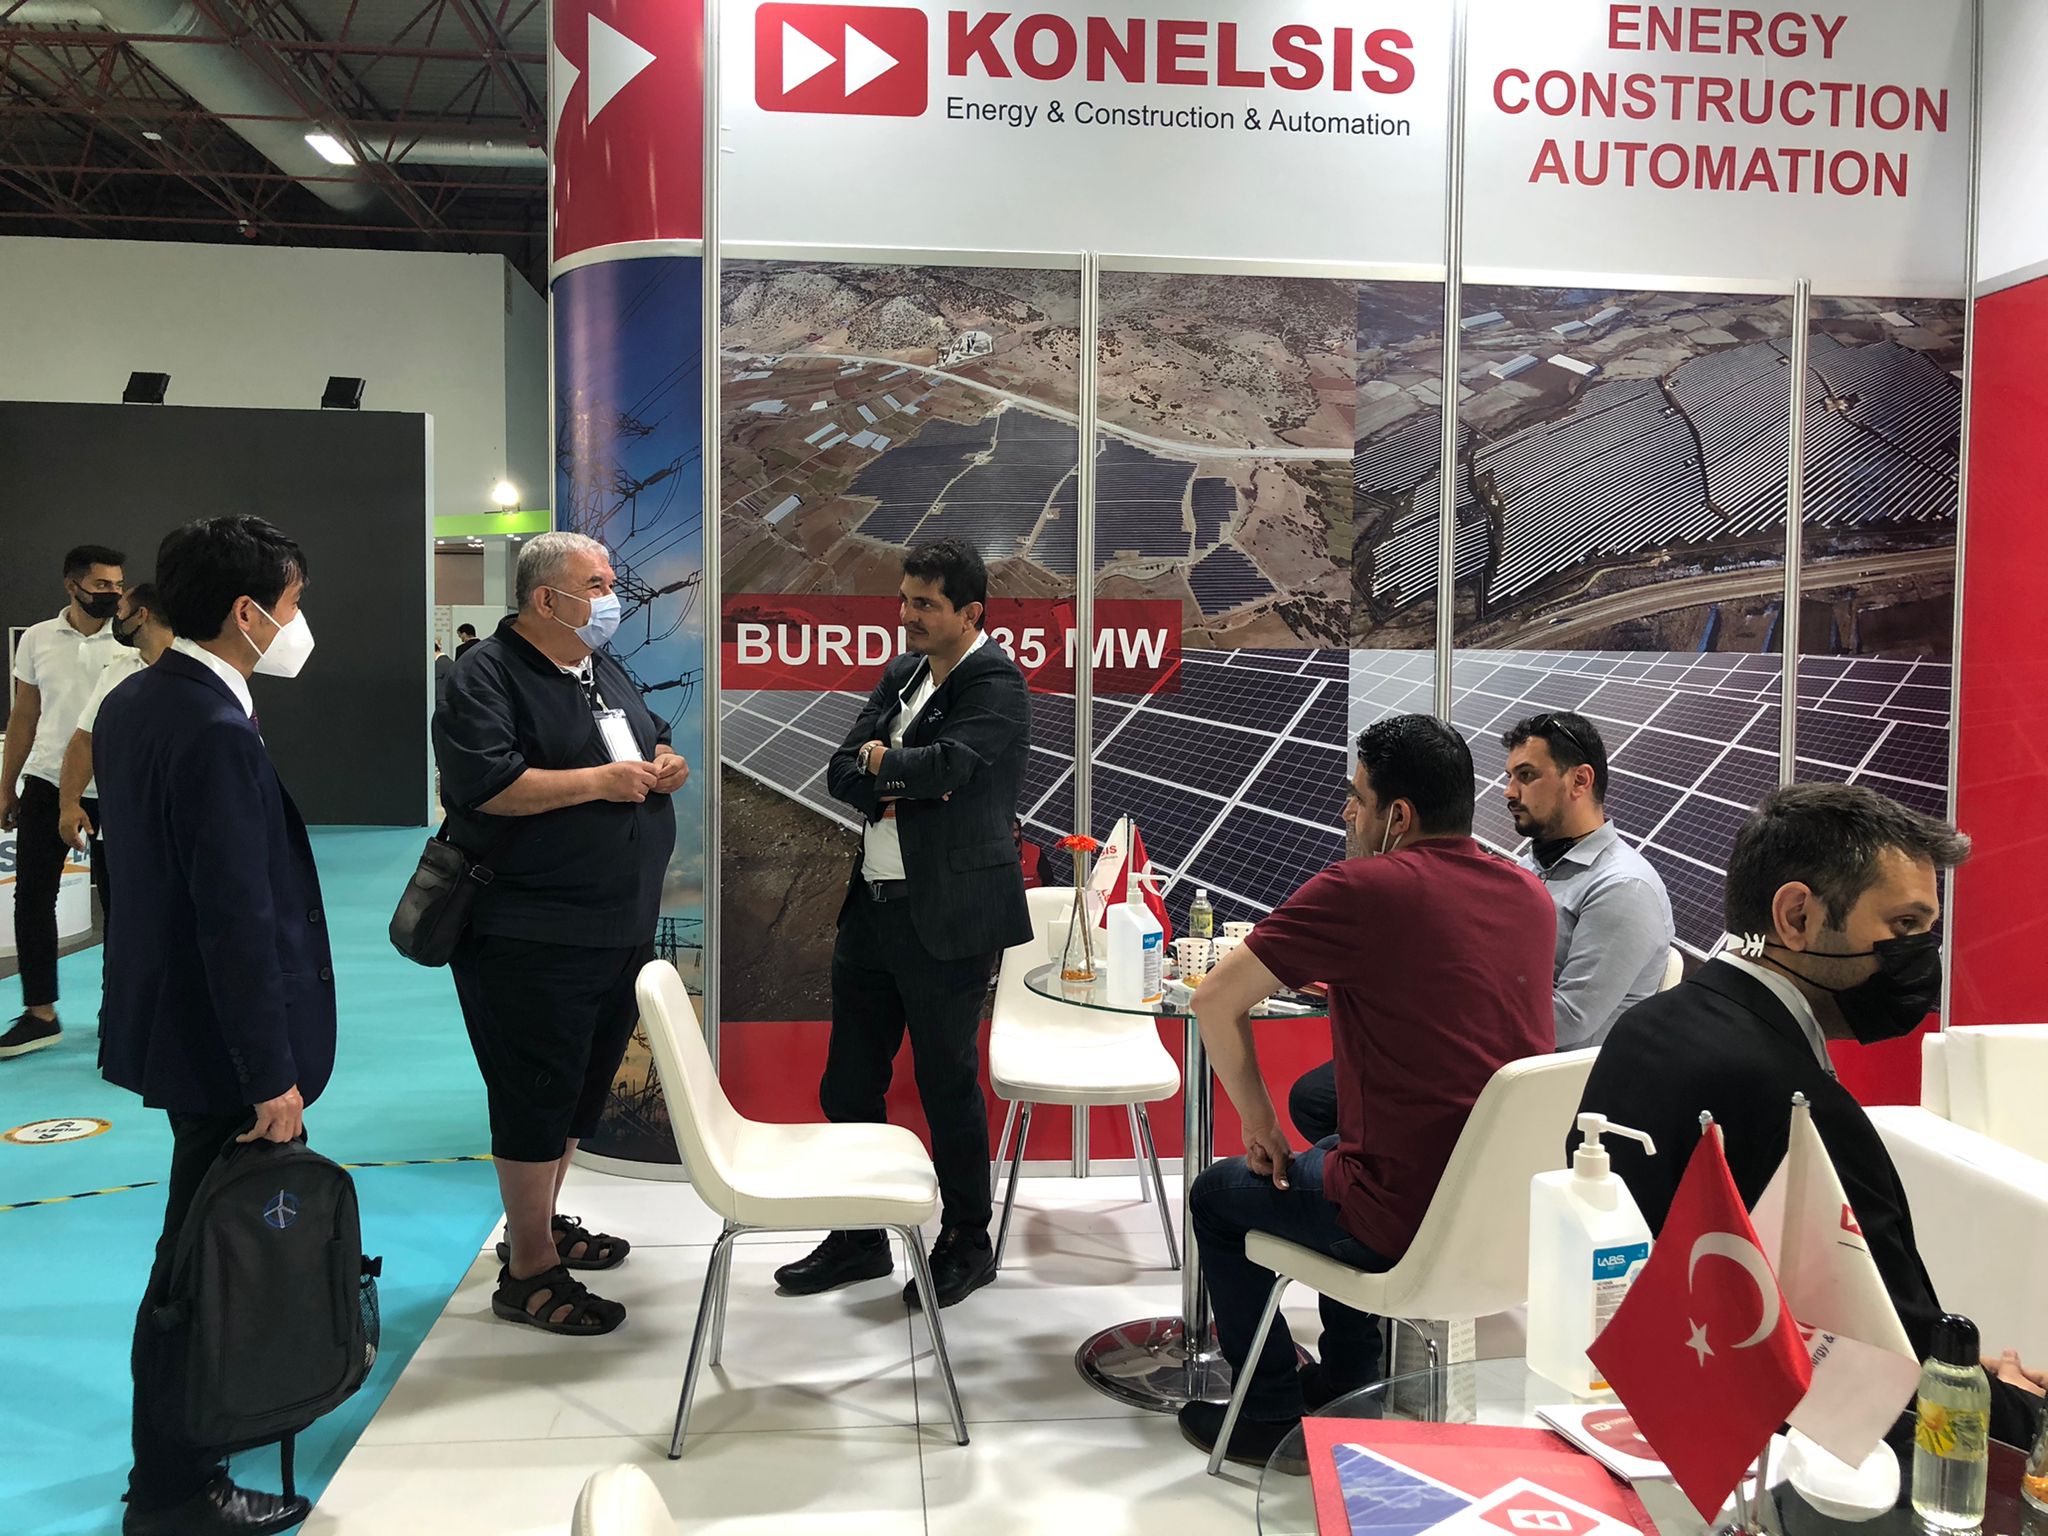 From Our Participation in Solarex 2021 Energy Fair